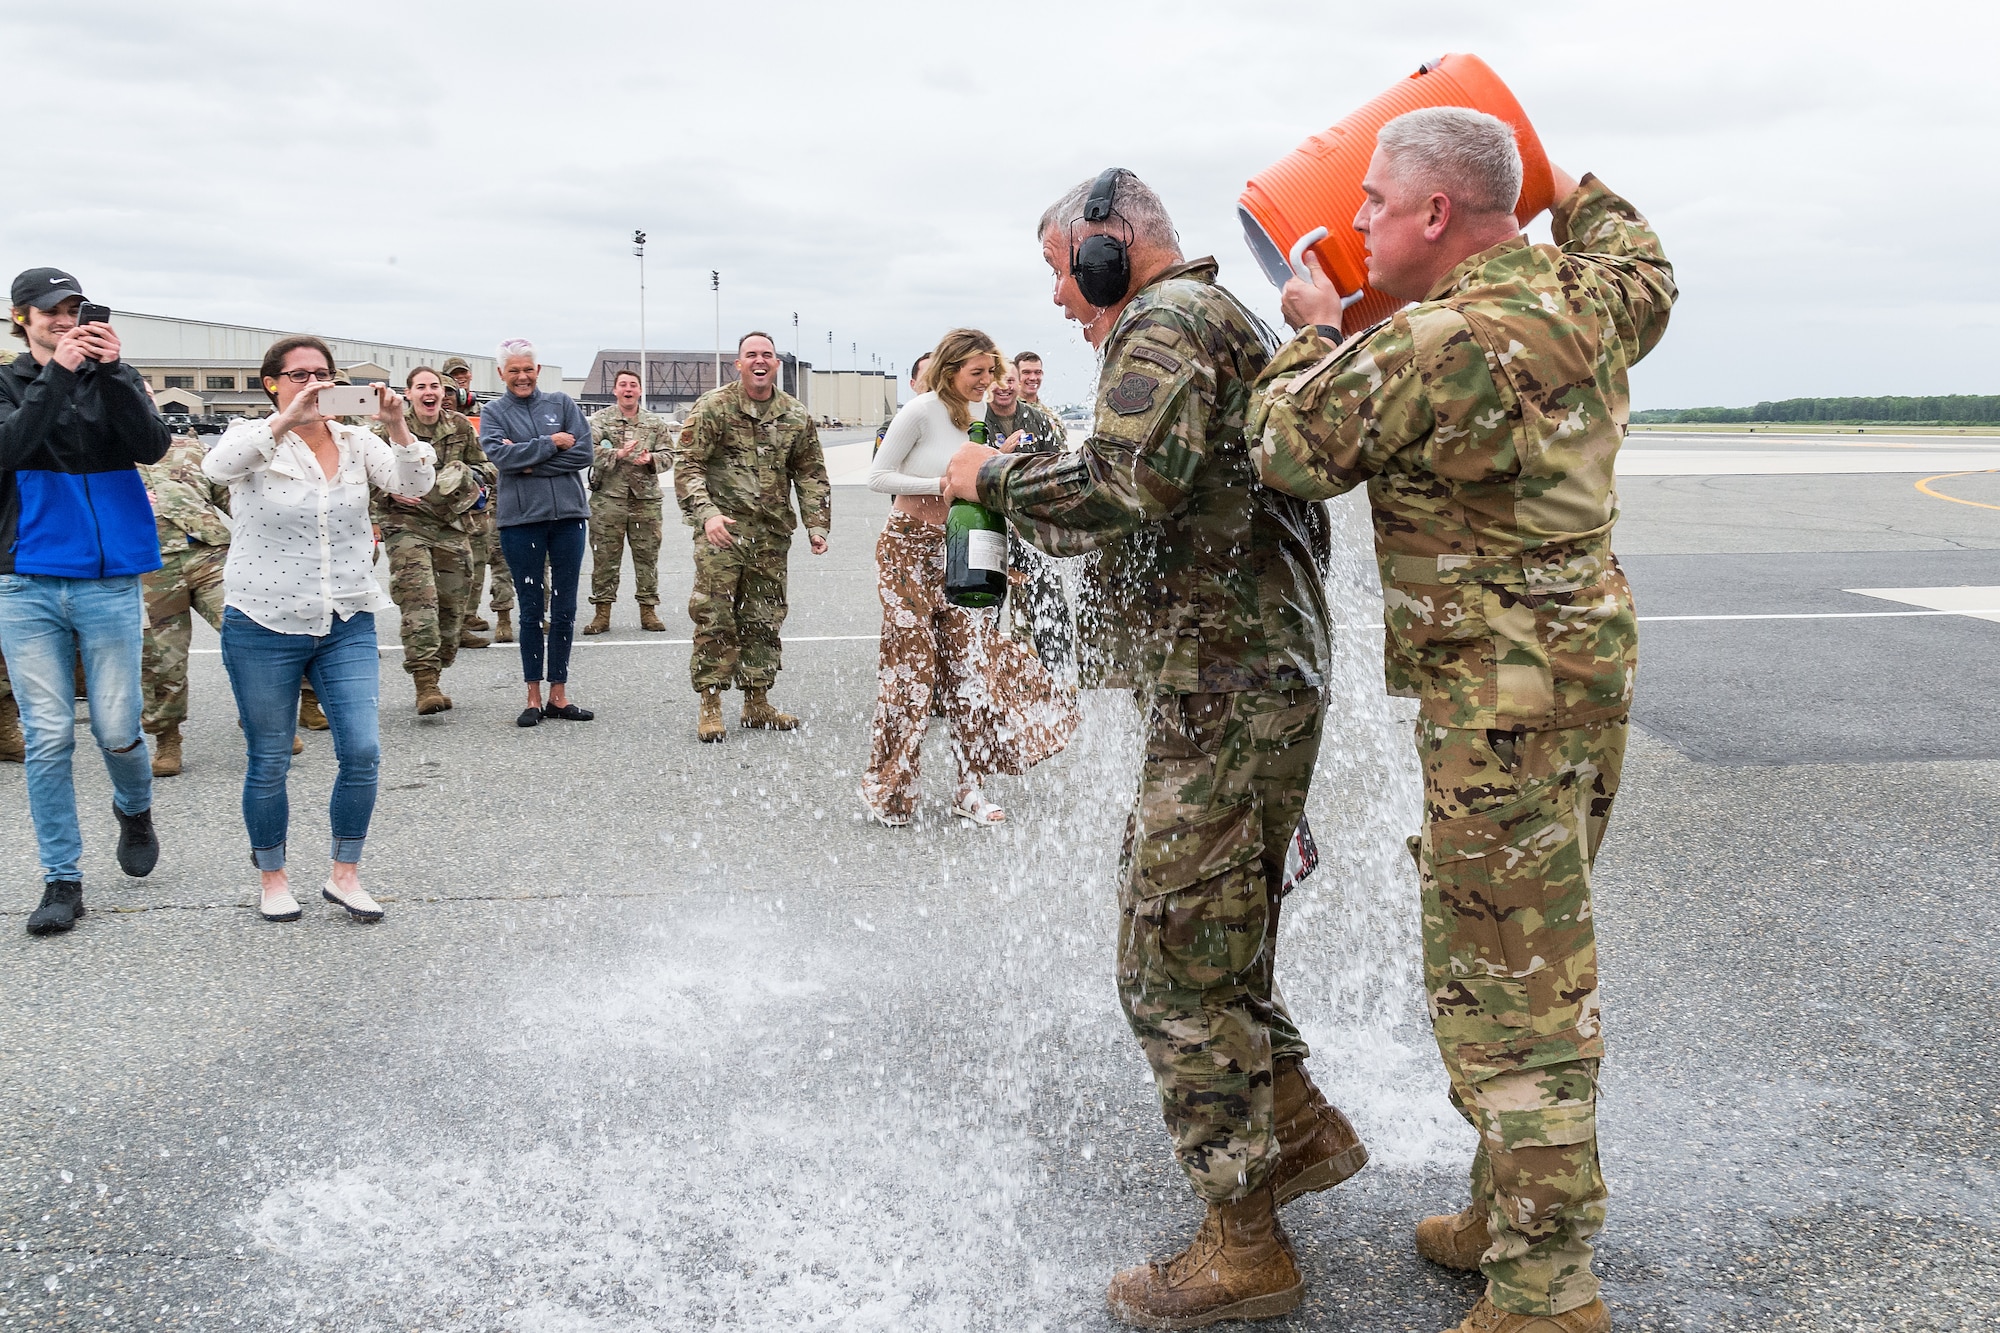 Col. Mike Peeler, right, 436th Operations Group commander, pours ice water on Col. Christopher May, 436th Maintenance Group commander, at Dover Air Force Base, Delaware, May 24, 2021. May received the traditional “fini flight” hose-down from family, friends and base personnel after the flight. May is retiring after serving 33 years in the Air Force. (U.S. Air Force photo by Roland Balik)